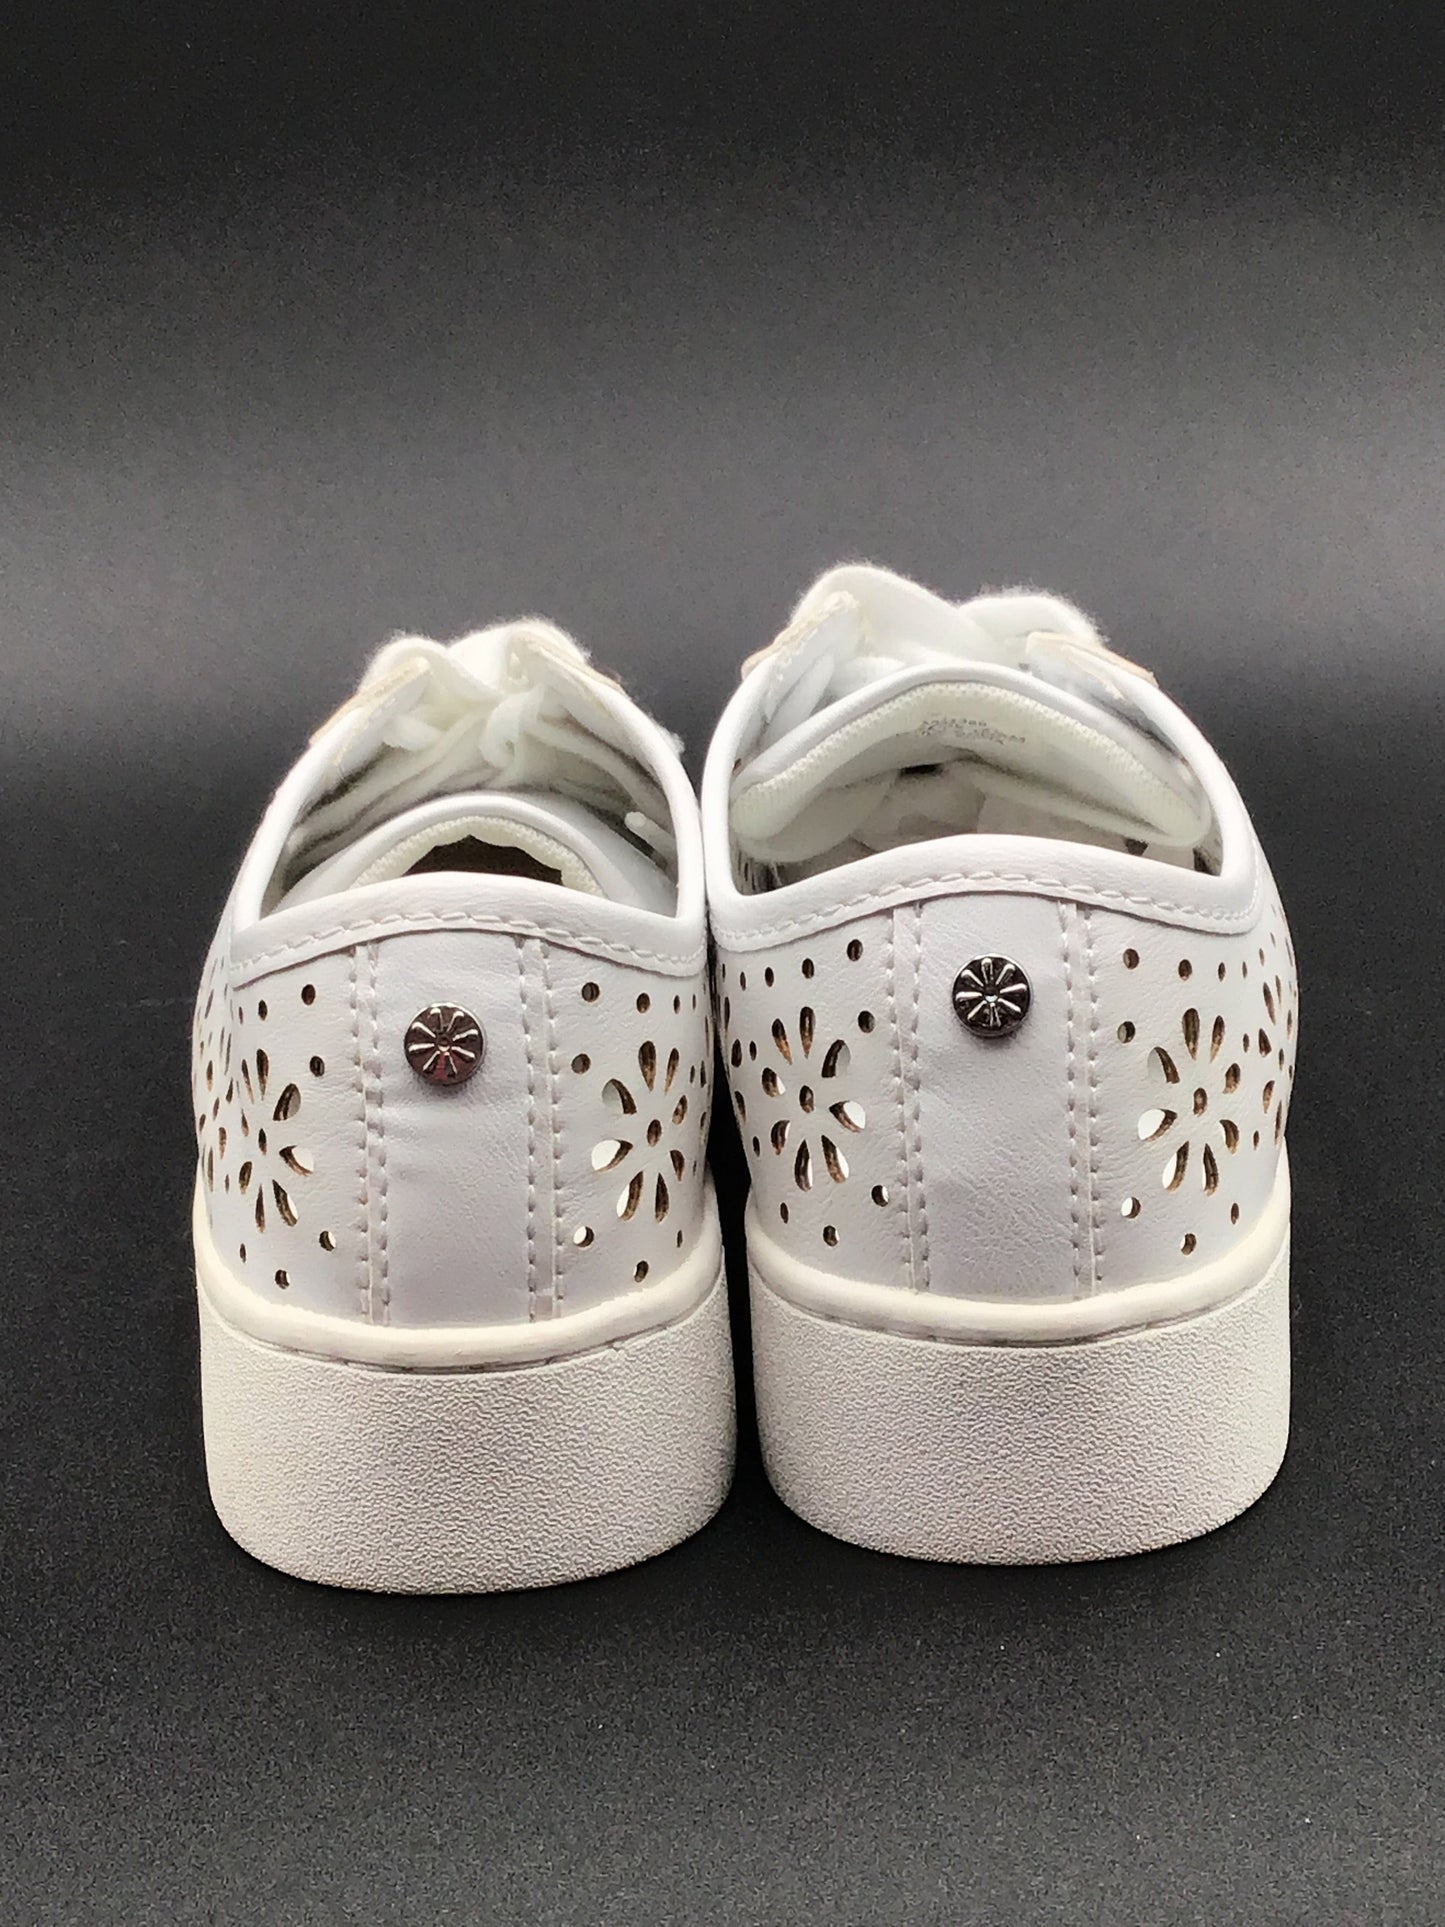 White Shoes Sneakers Isaac Mizrahi Live Qvc, Size 7.5